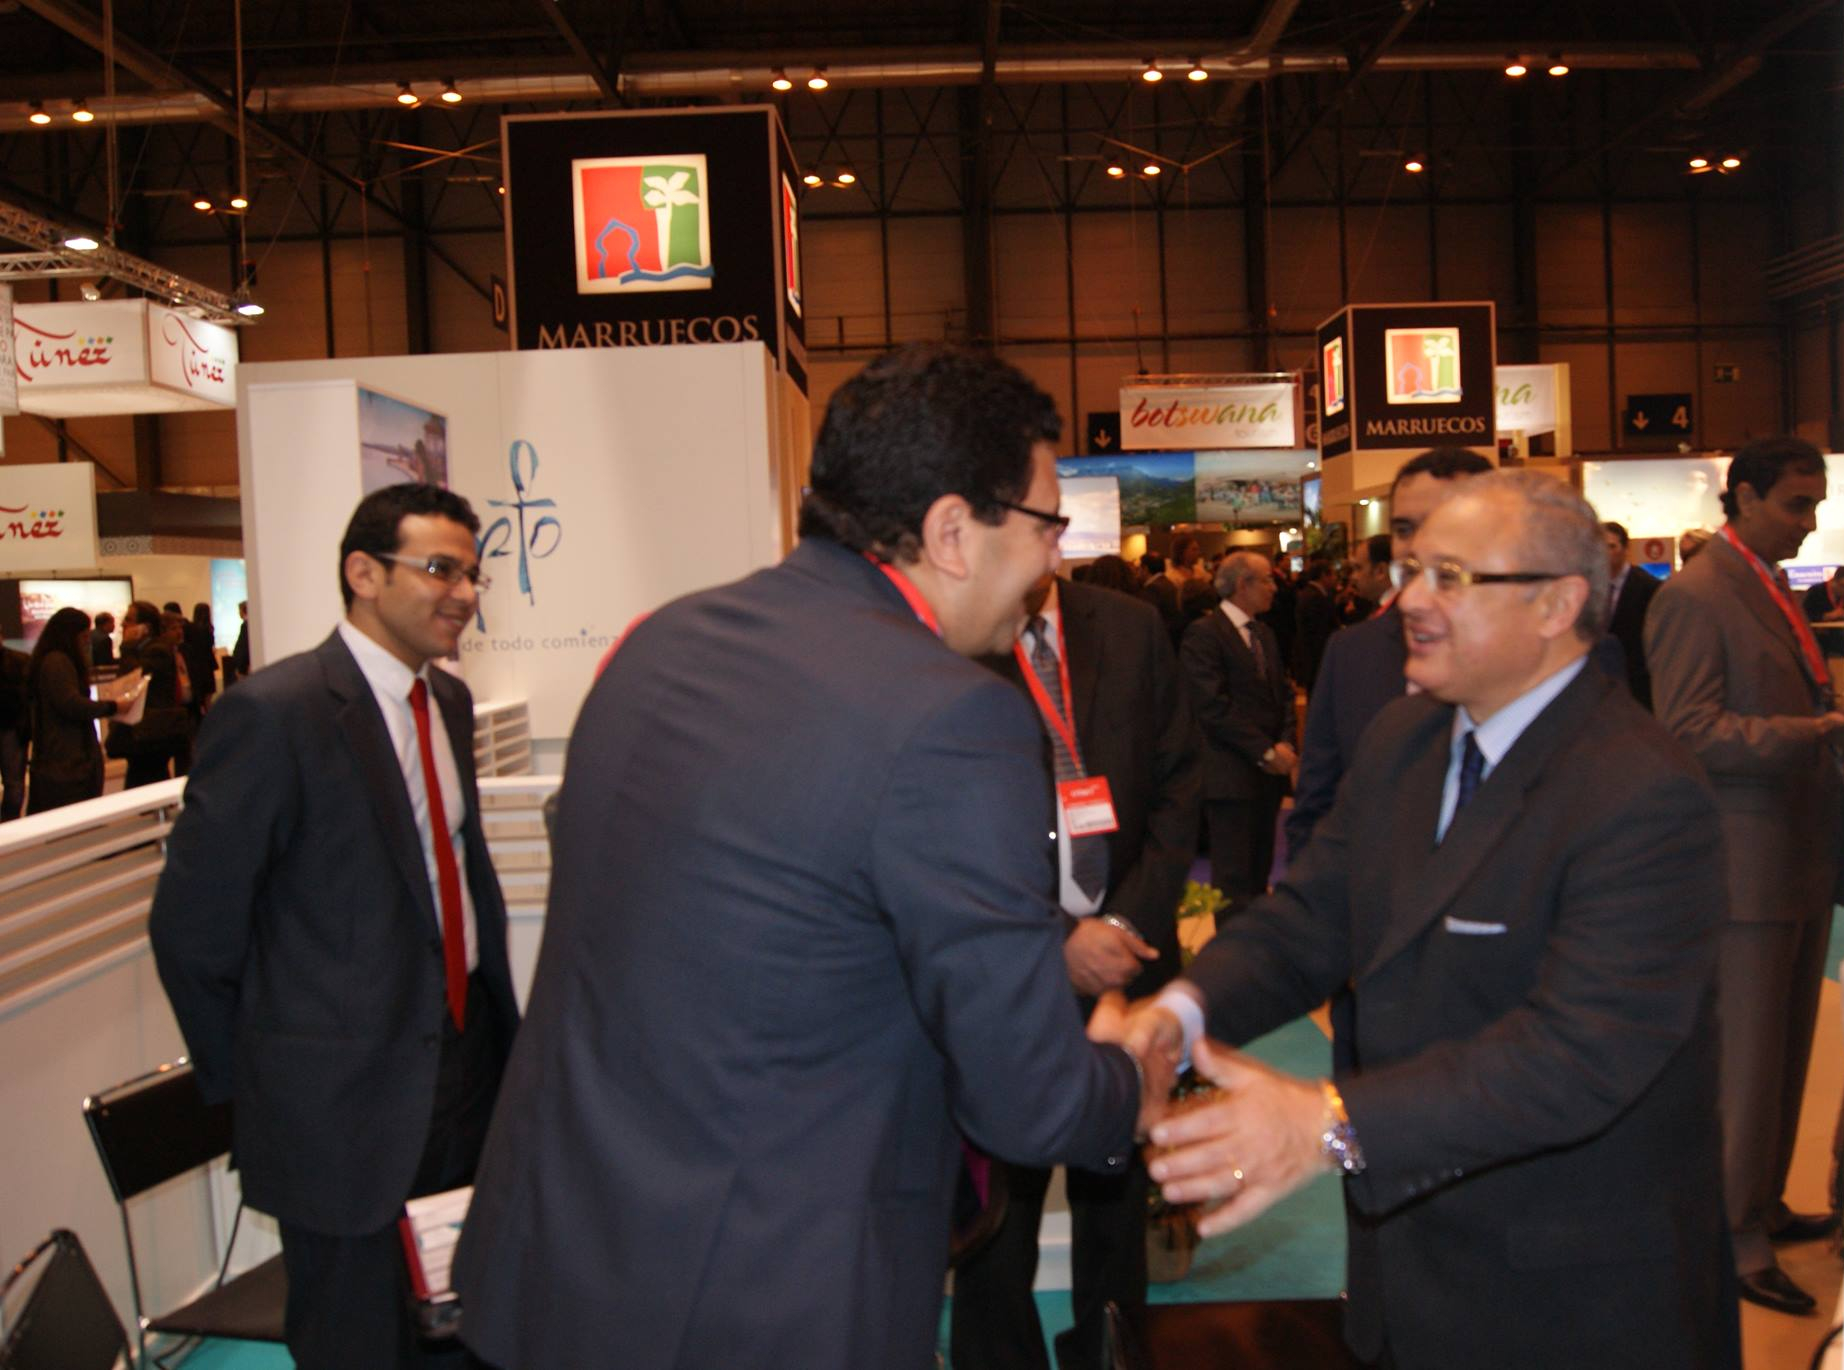 Nilers Tours CEO welcoming his excellency The Tourism Minister of Egypt during (FITUR)International Tourism Trade Fair of Madrid